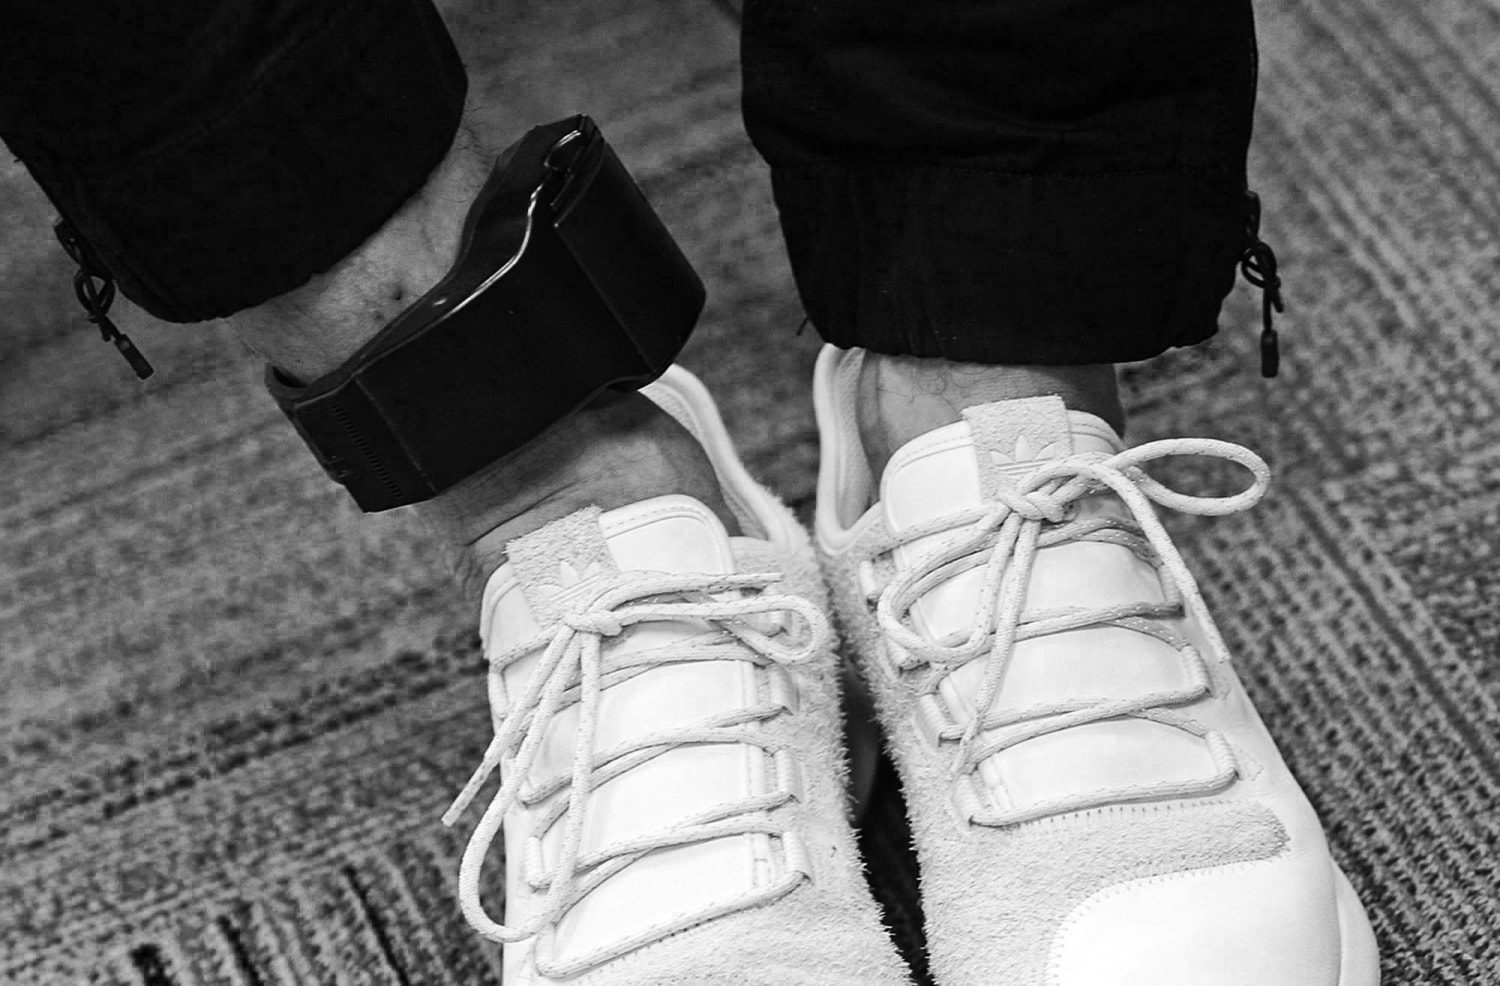 Three People Share How Ankle Monitoring Devices Fail, Harm, and Stigmatize  | ACLU